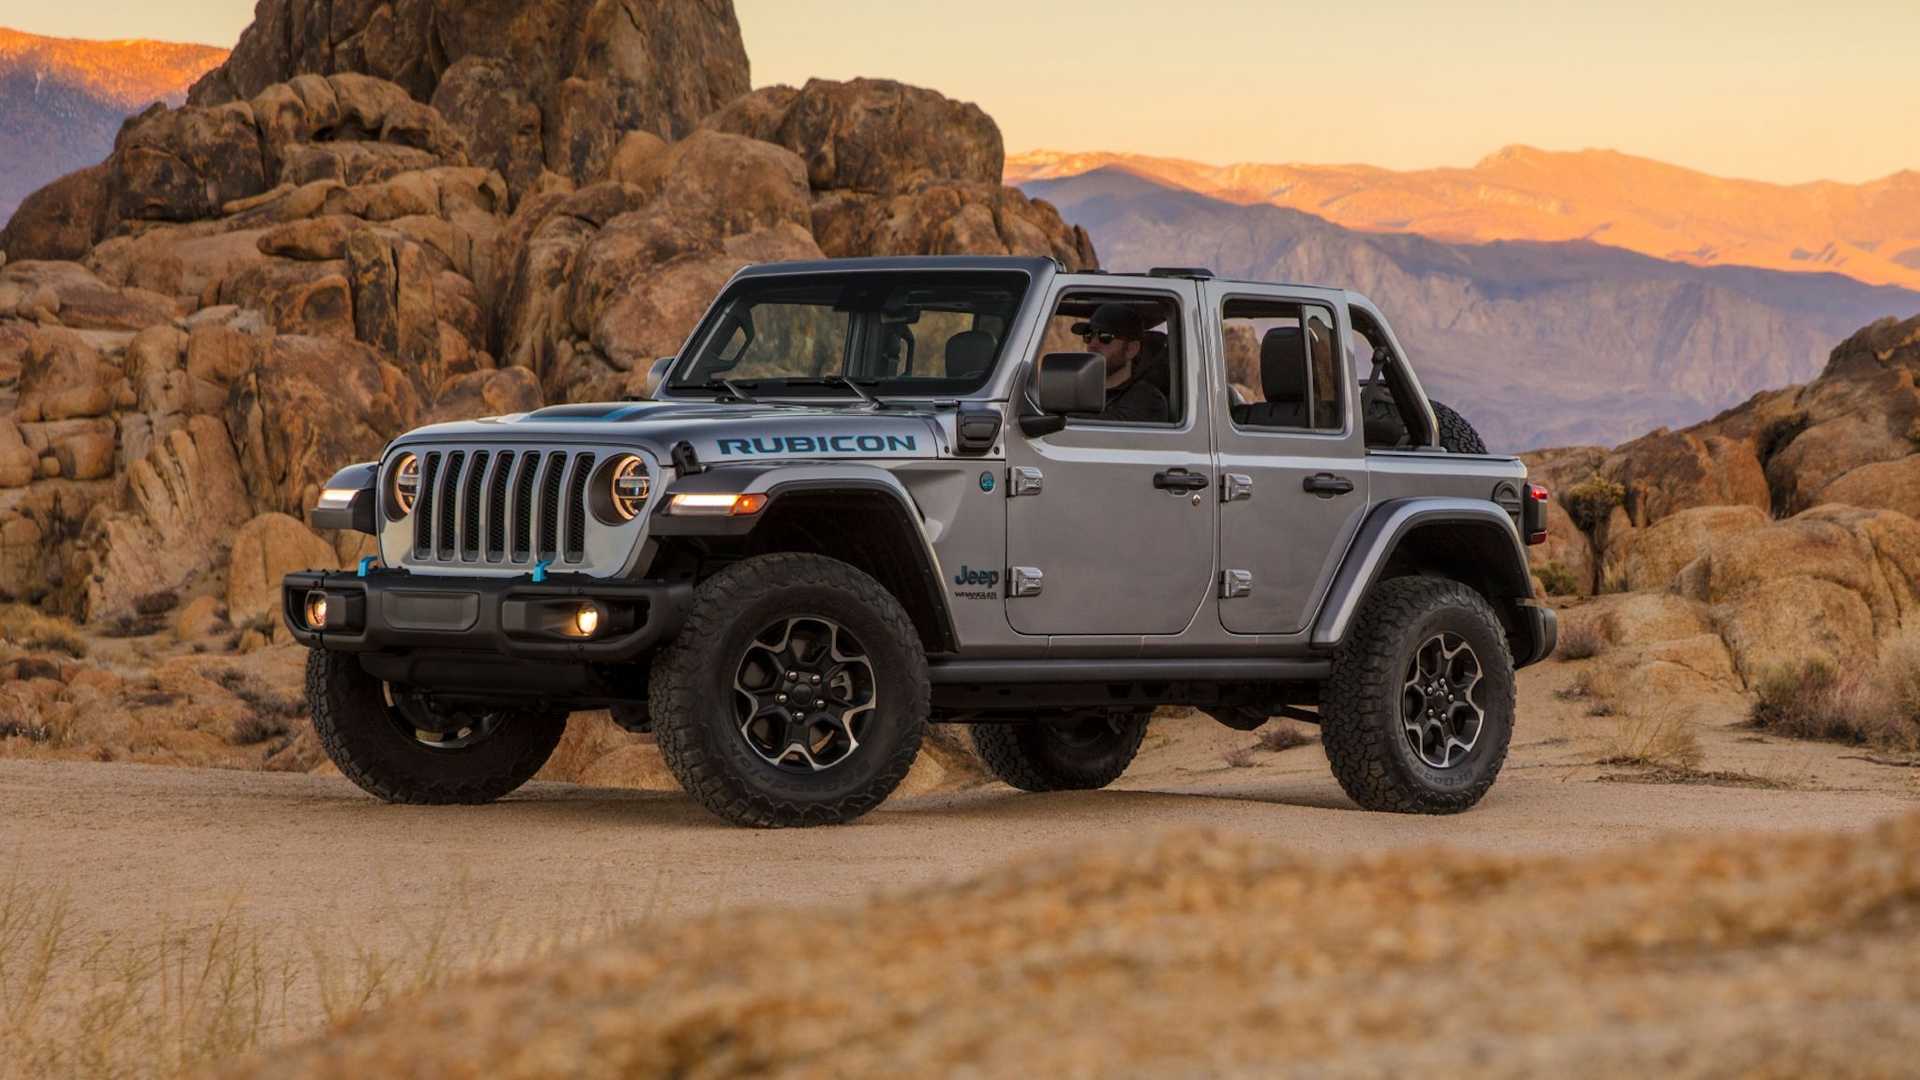 jeep-wrangler-4xe-the-brand-s-first-electric-vehicle-boss-hunting